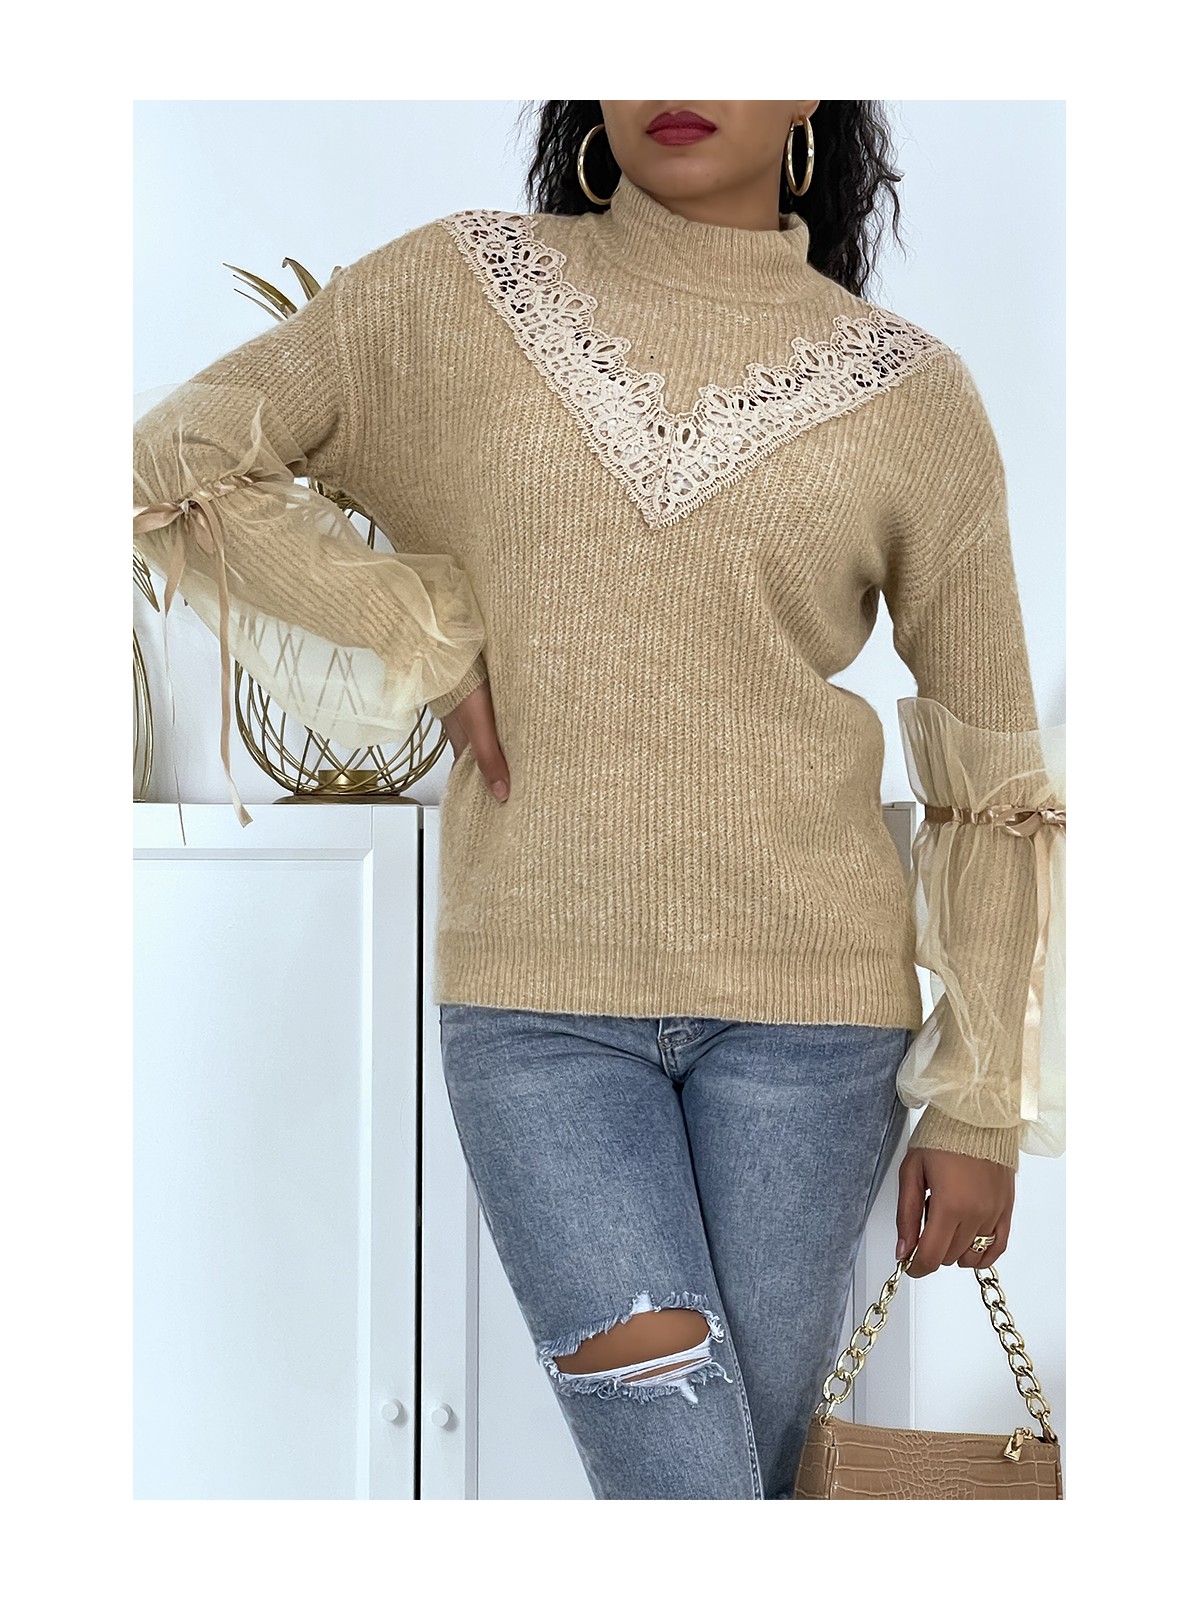 Pull col montant taupe à manches bouffantes en tulle - 2